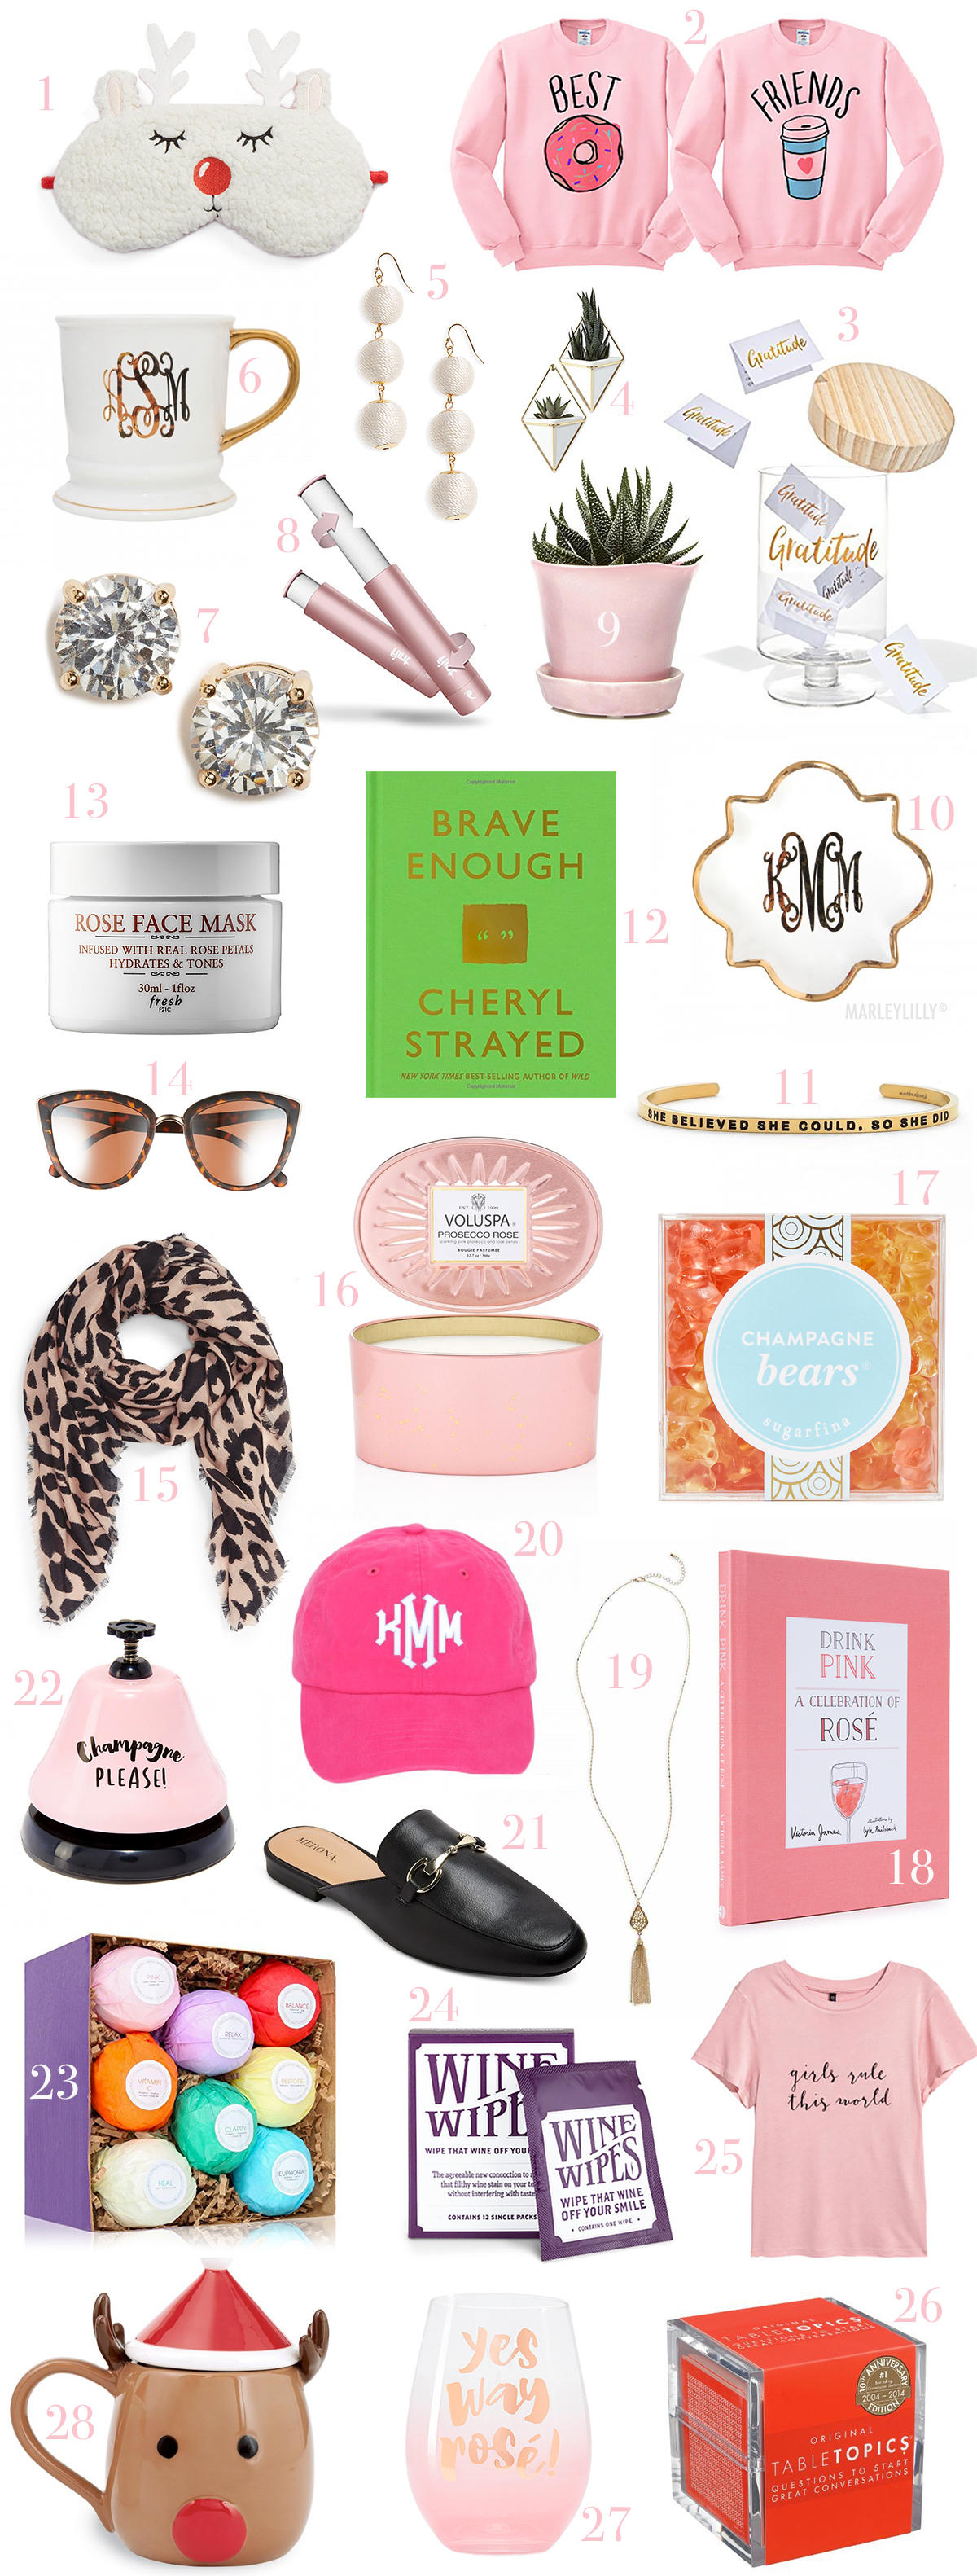 Round-up of the best Gifts under $25 for your BFF | BFF Gift Guide under $25 | Gifts for your BFF by southern blogger Stephanie Ziajka from Diary of a Debutante